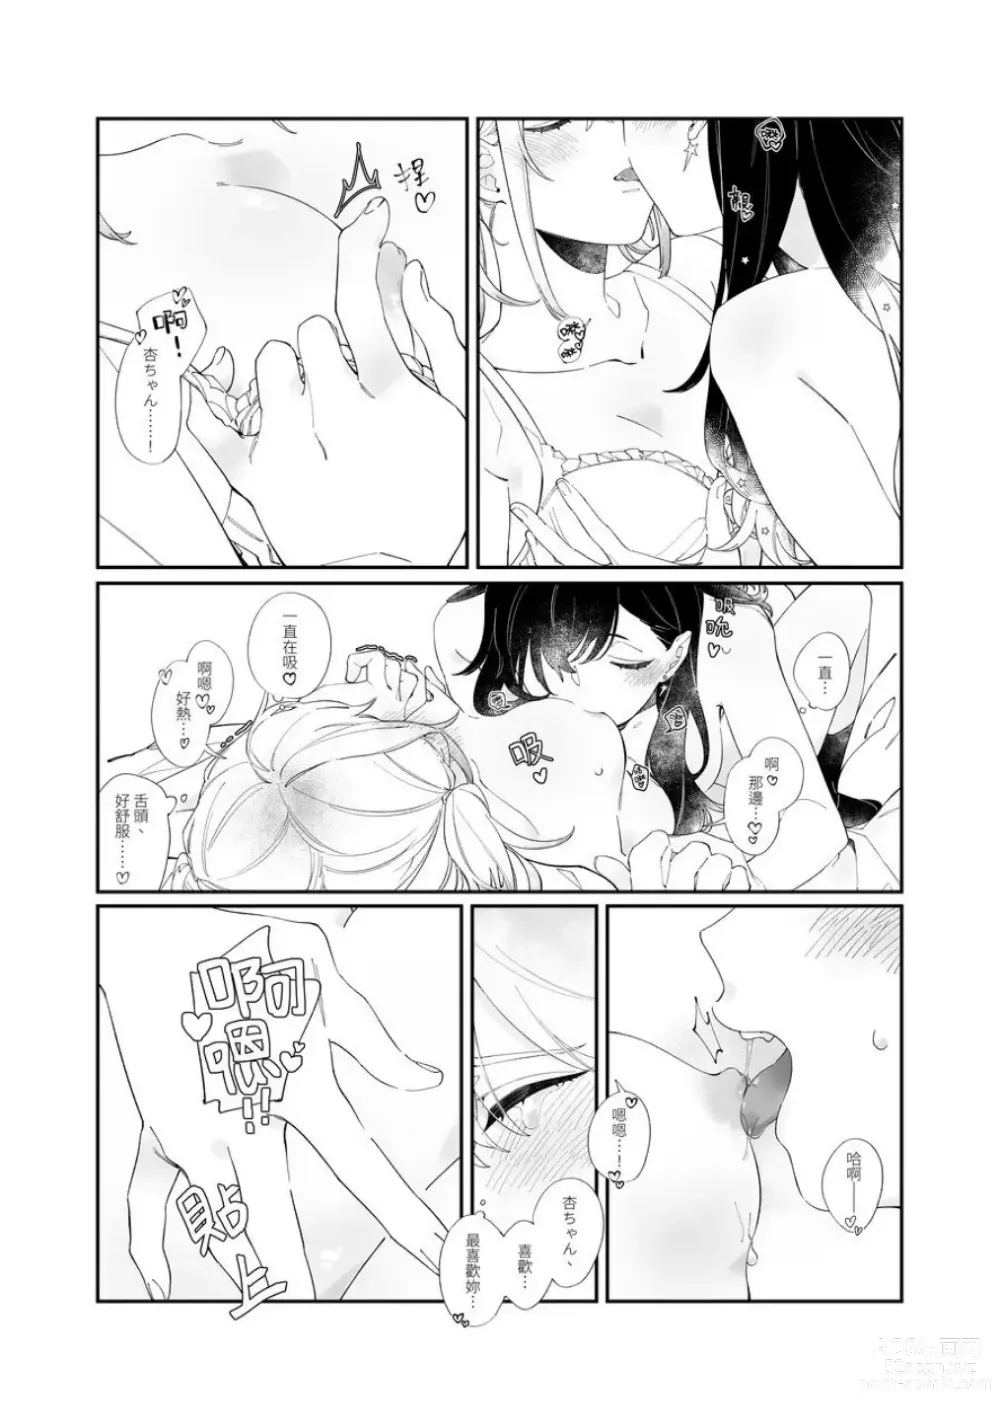 Page 12 of doujinshi 《First Time はじめての》